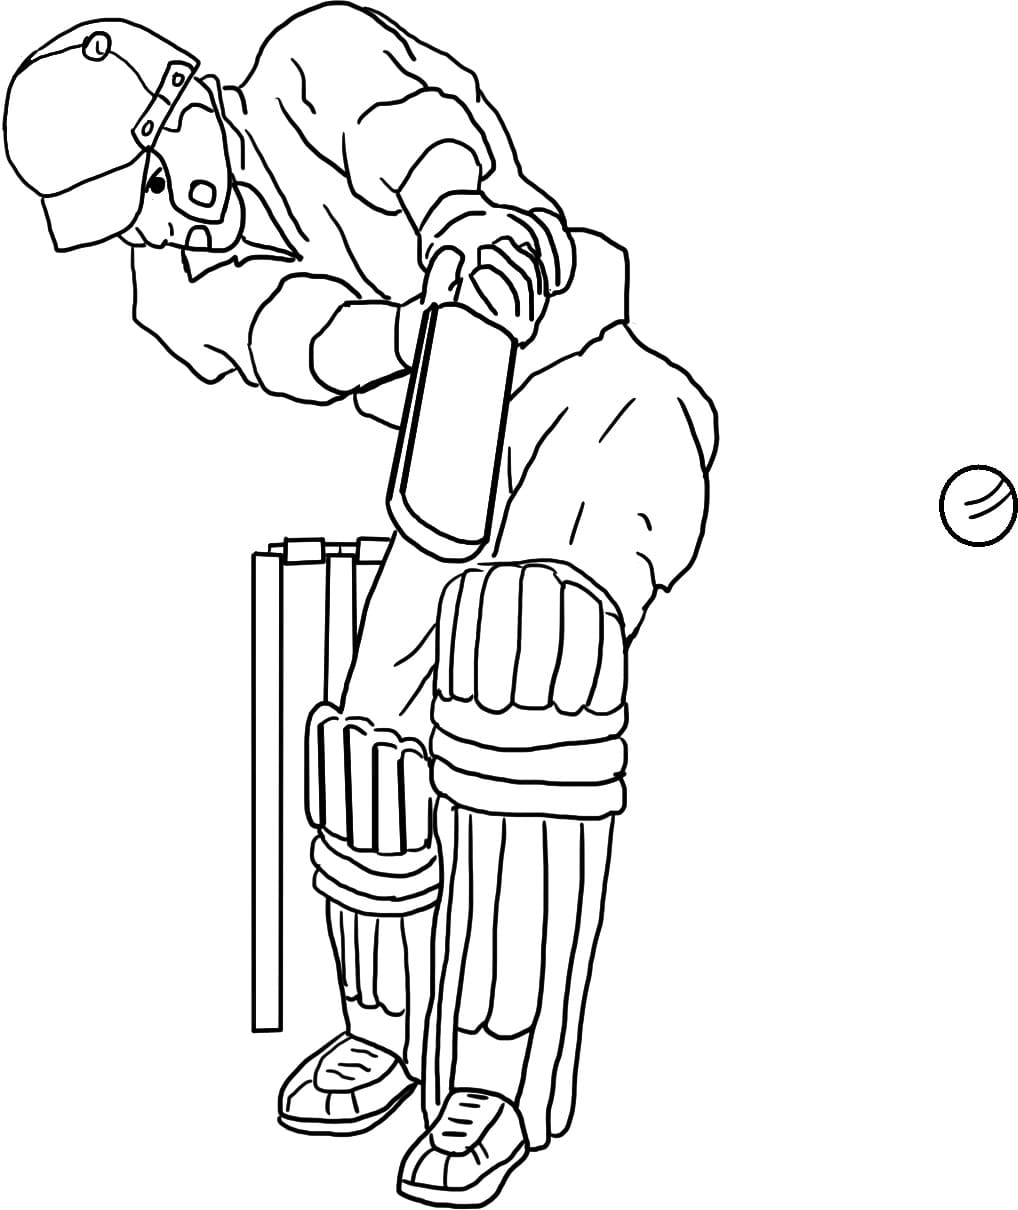 playing-cricket-coloring-page-download-print-or-color-online-for-free